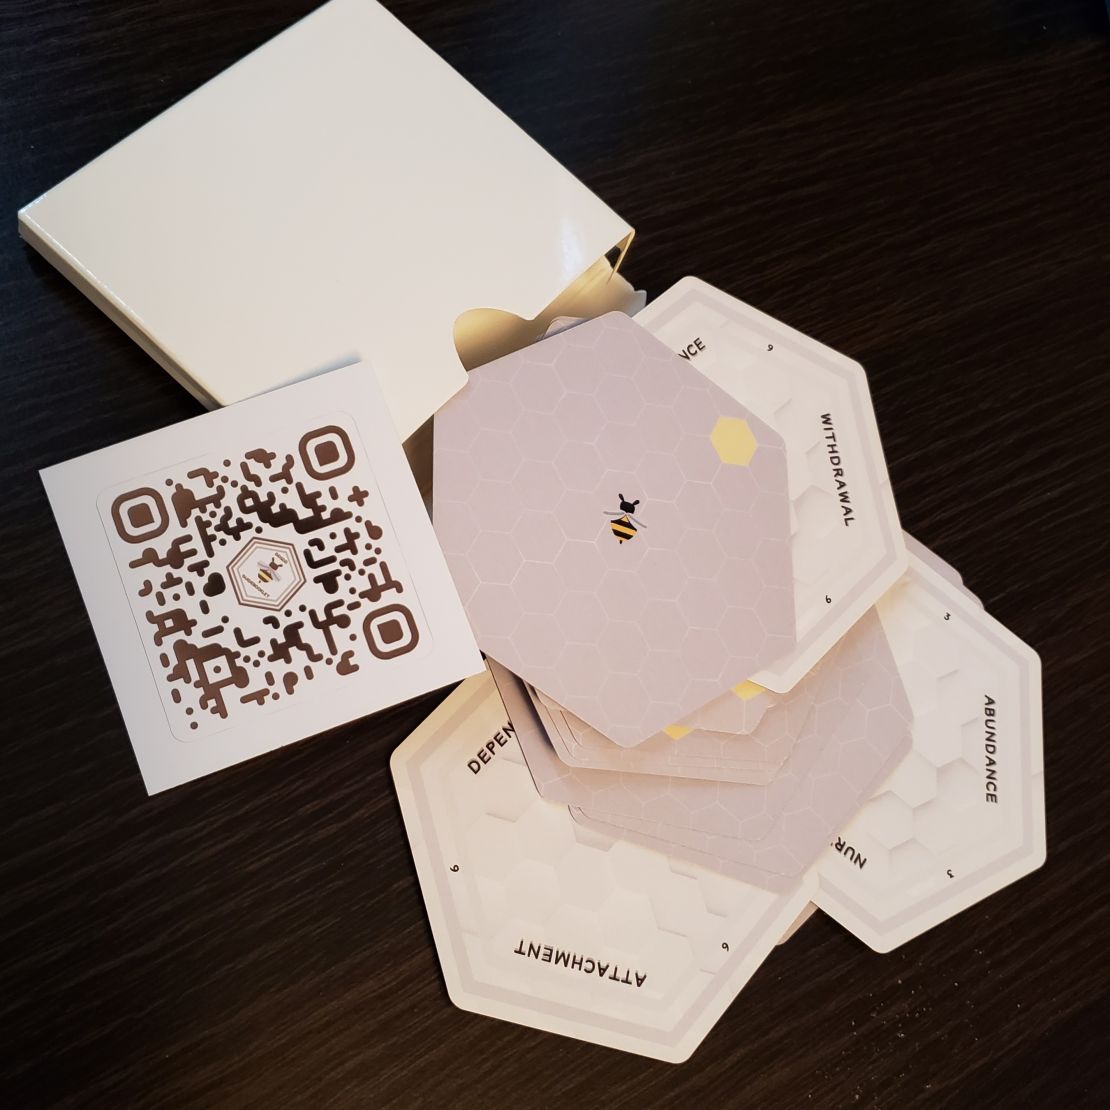 Self-Discovery card deck with box and QR Code to guidebook